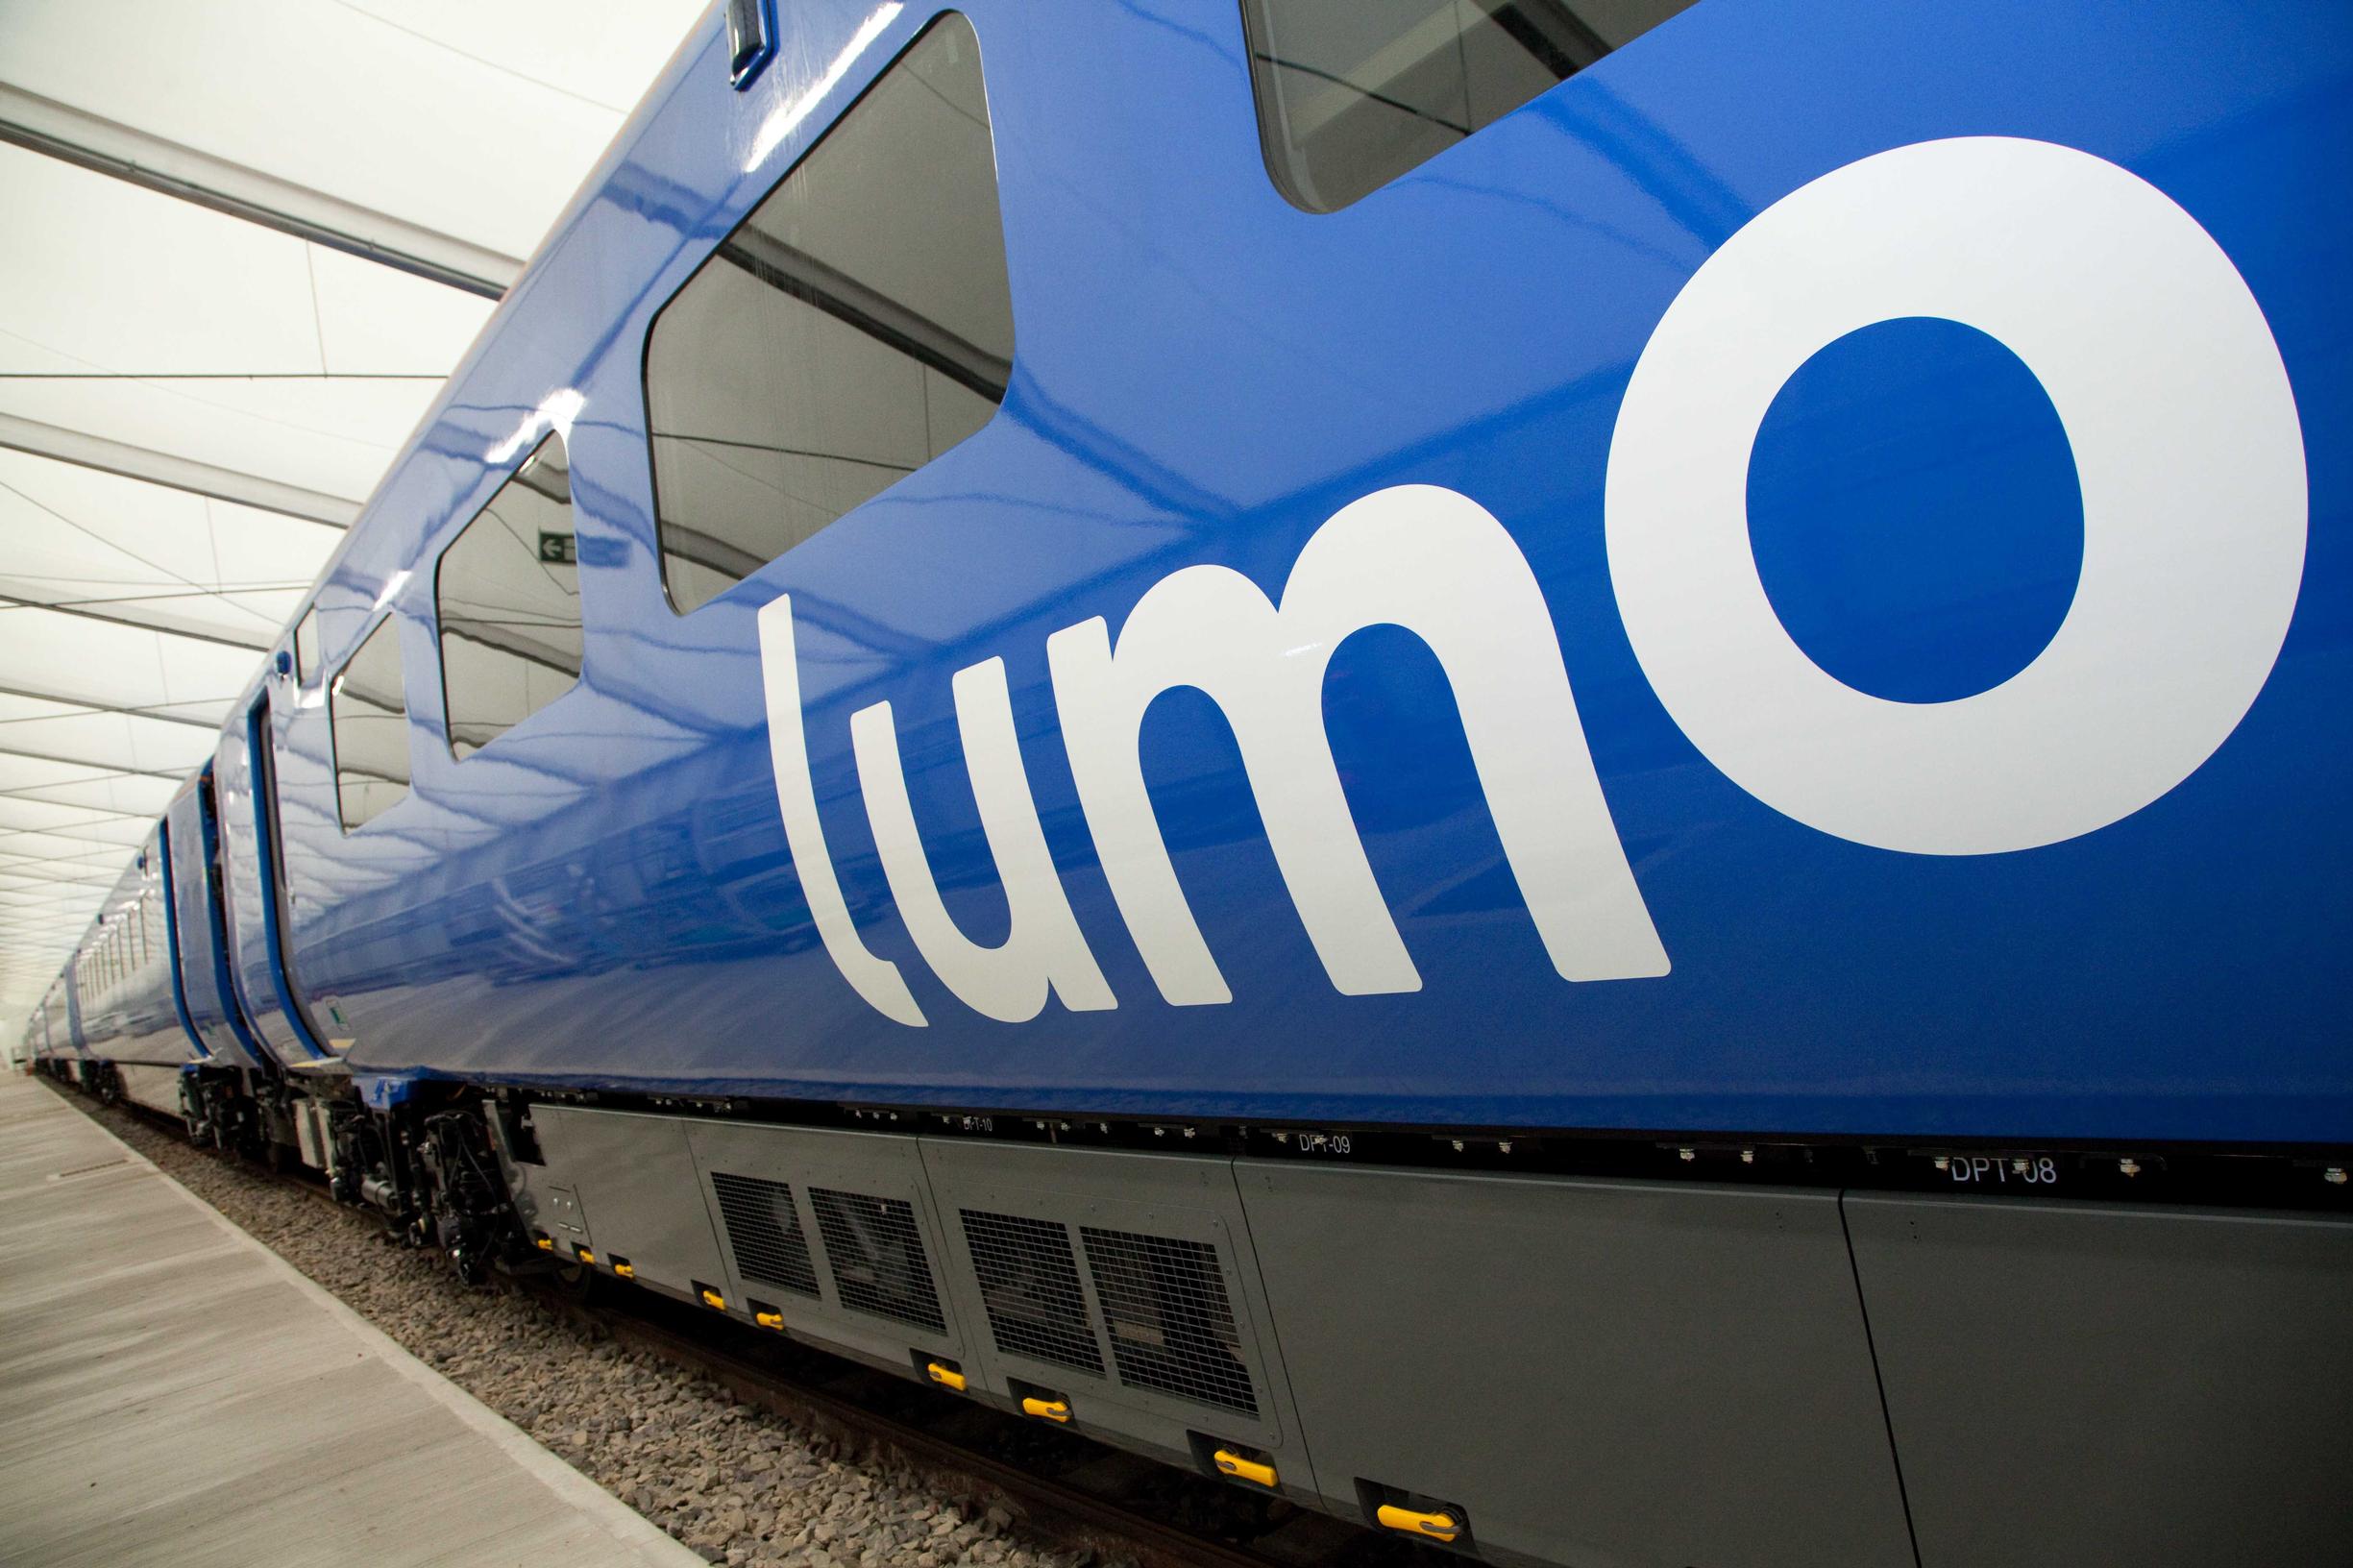 First wants to expand its open access operations as part of its Lumo business